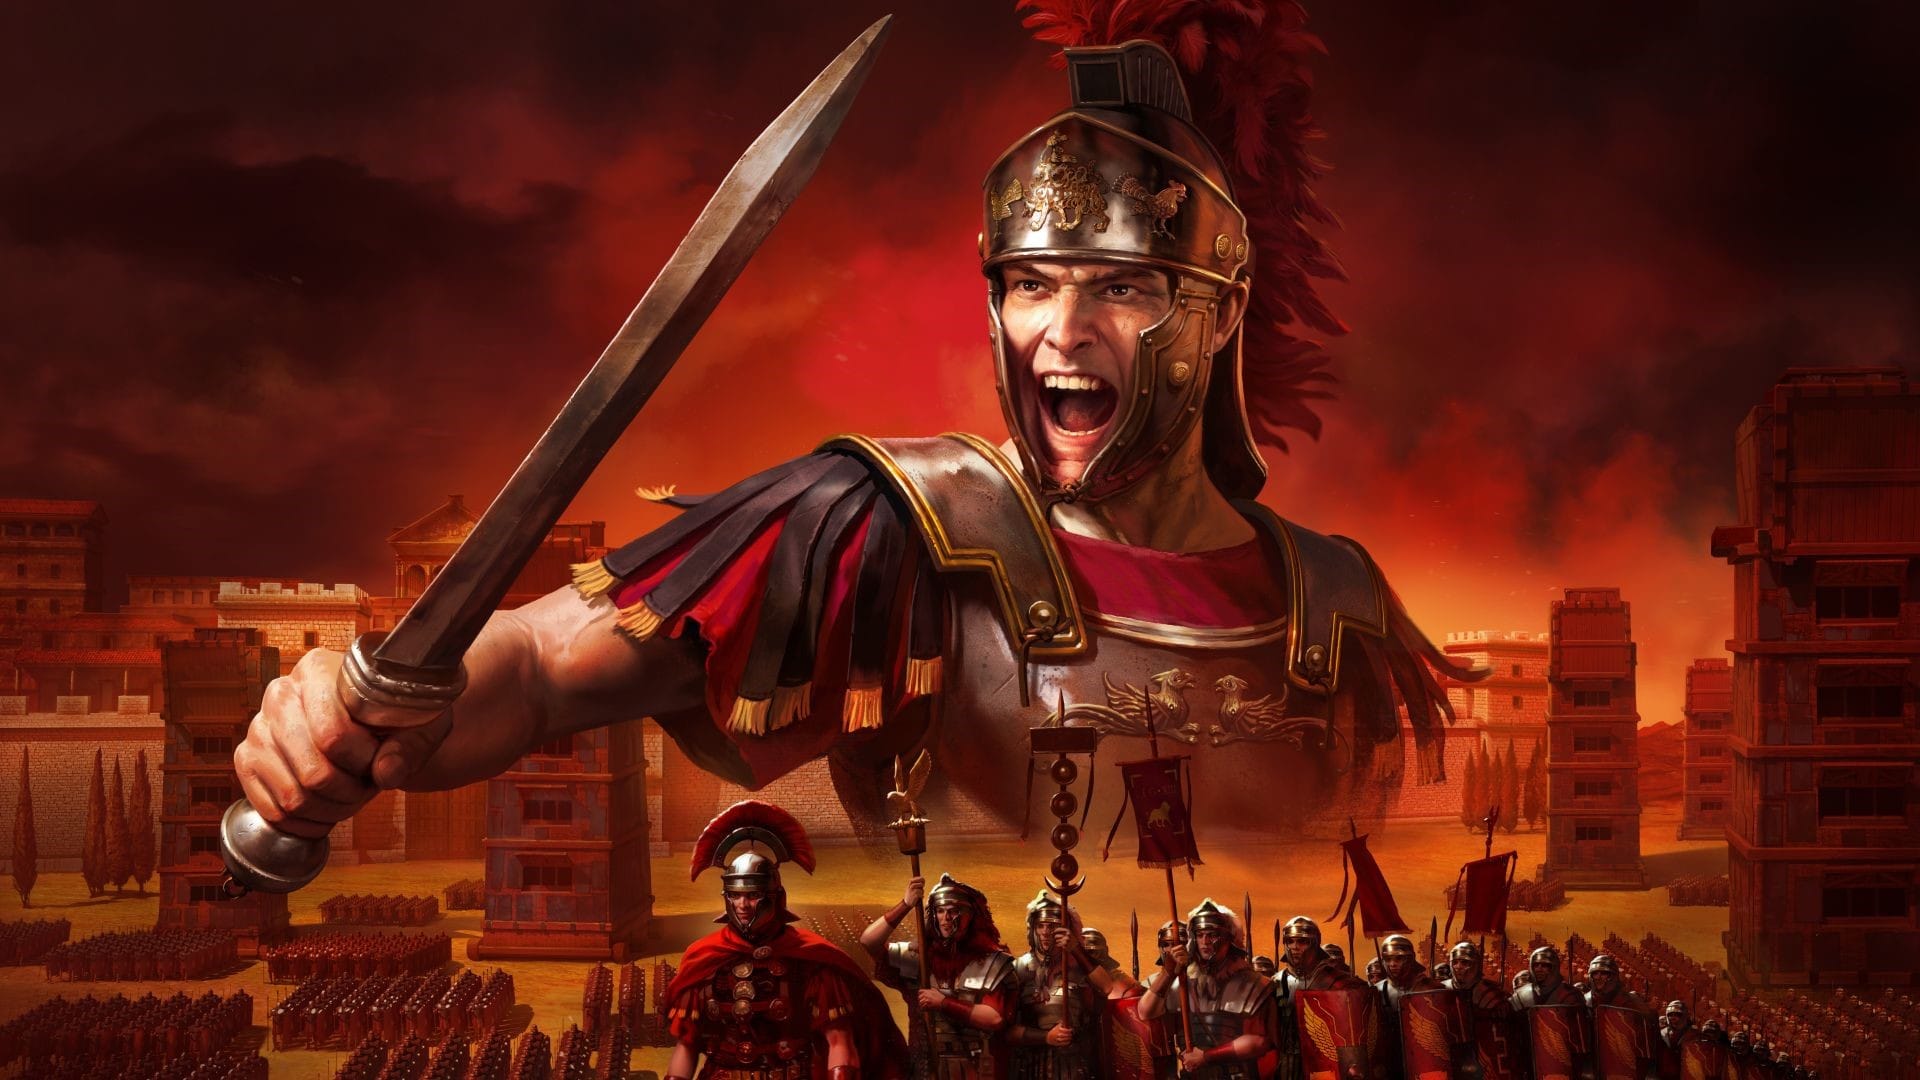 An army of Roman soldiers in a red background